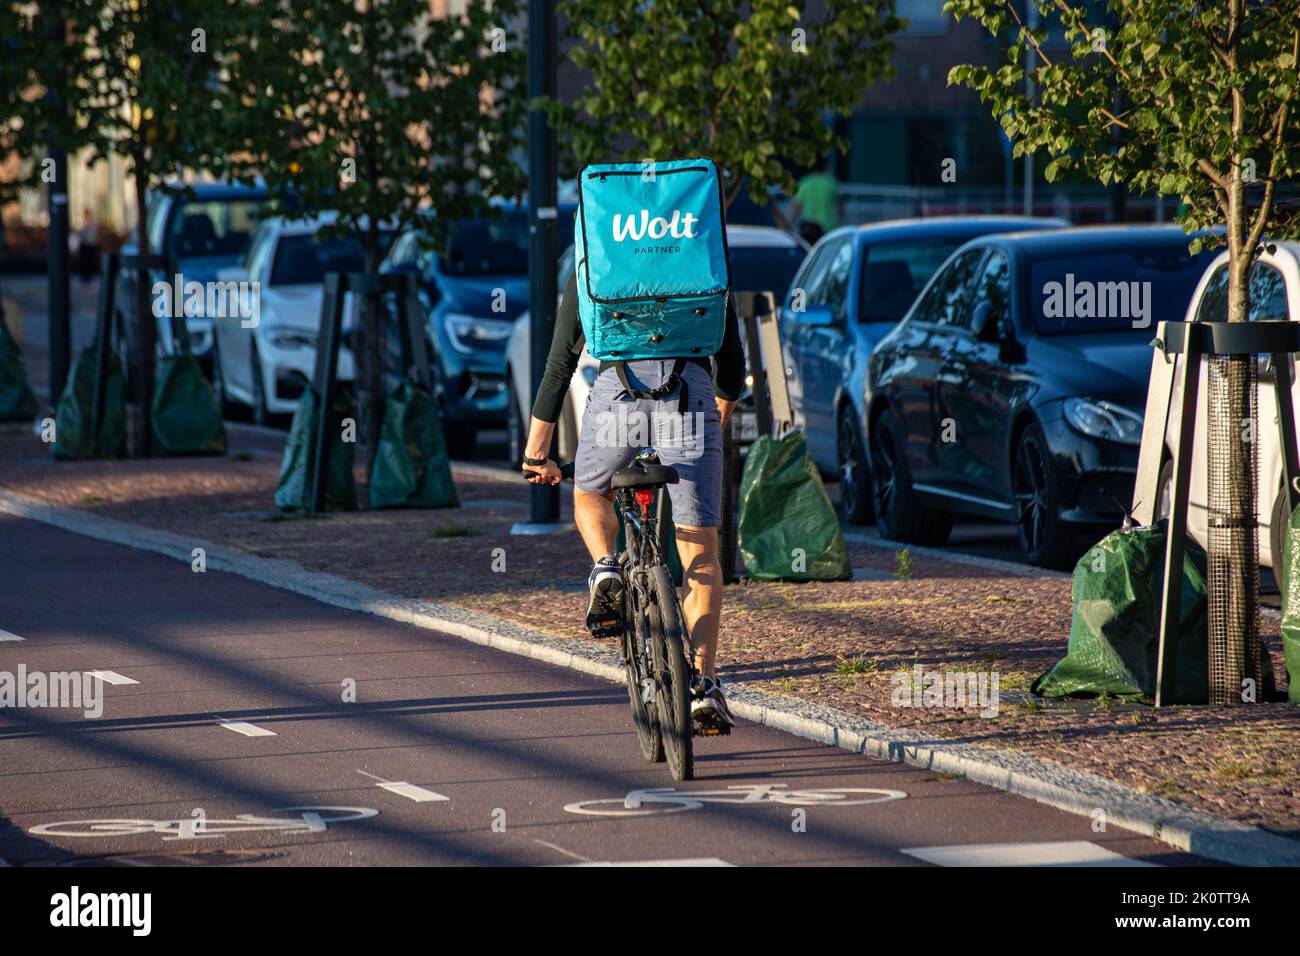 Wolt bicycle courier at work in Helsinki, Finland Stock Photo